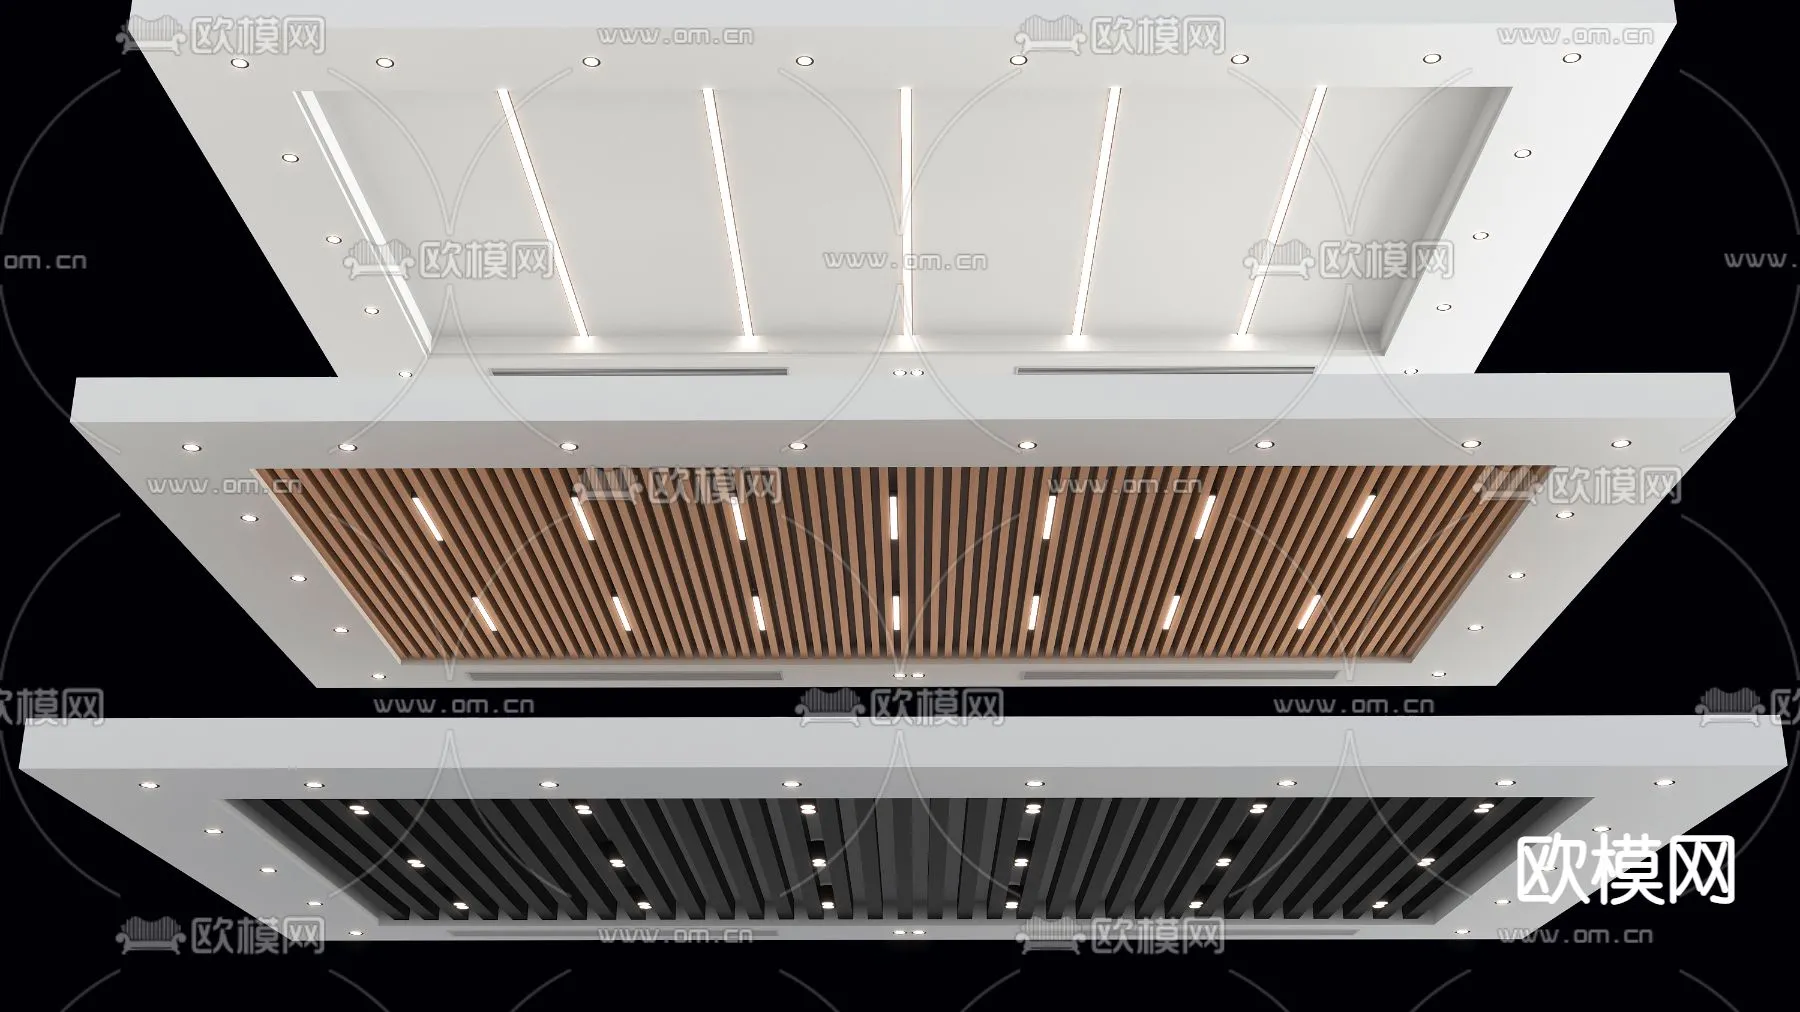 3DS MAX – DETAIL – CEILING – VRAY / CORONA – 3D MODEL – 3155